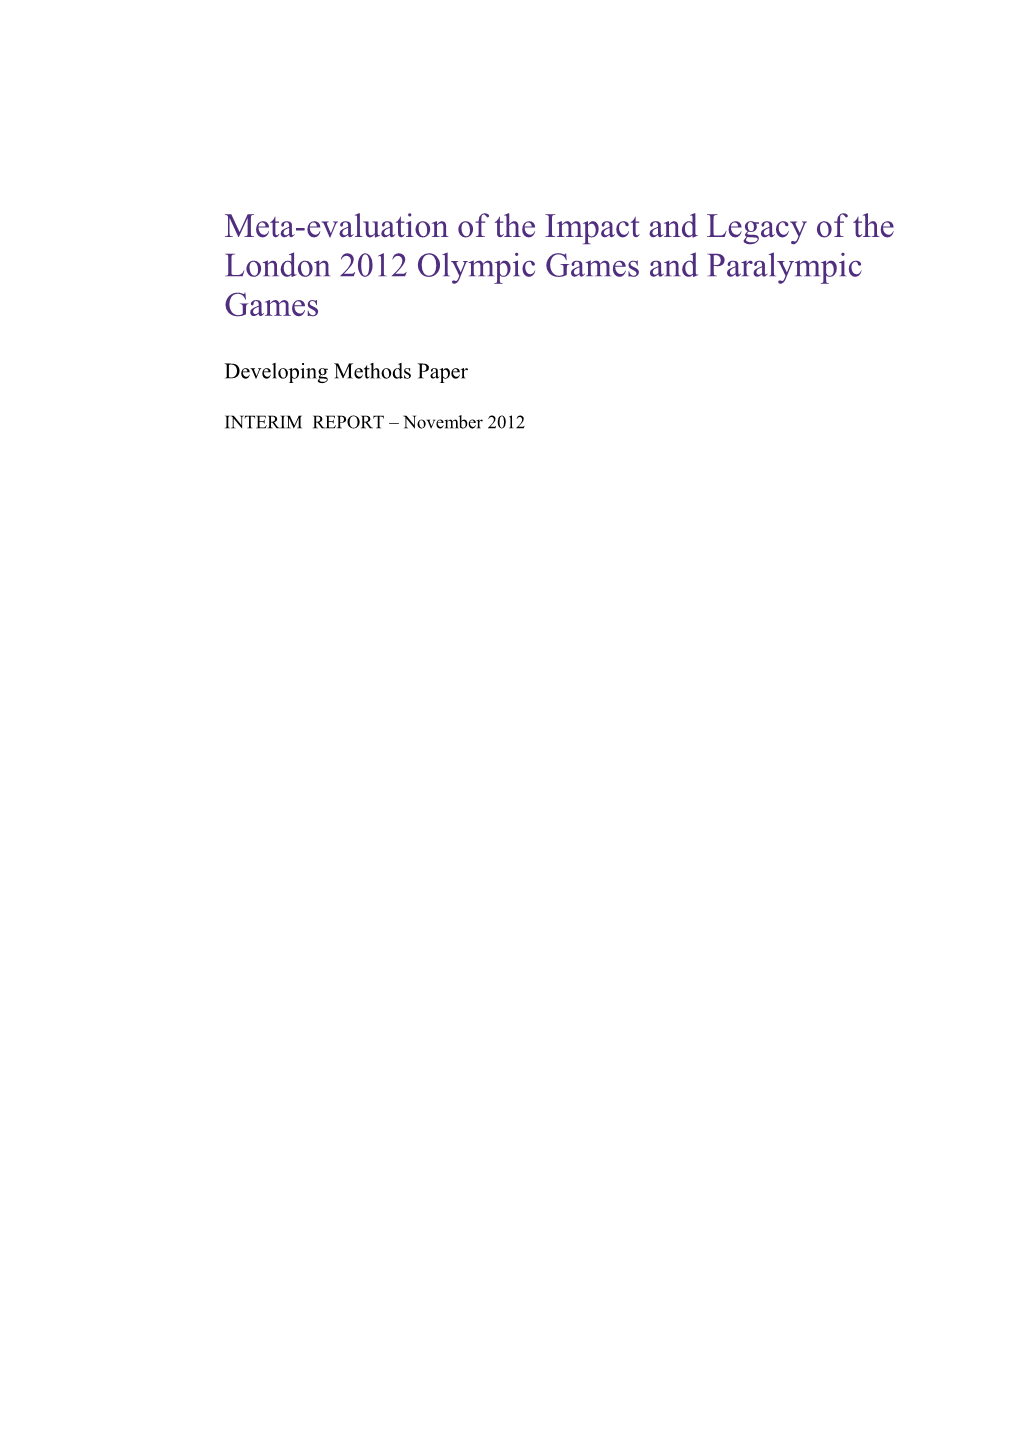 Meta-Evaluation of the Impact and Legacy of the London 2012 Olympic Games and Paralympic Games